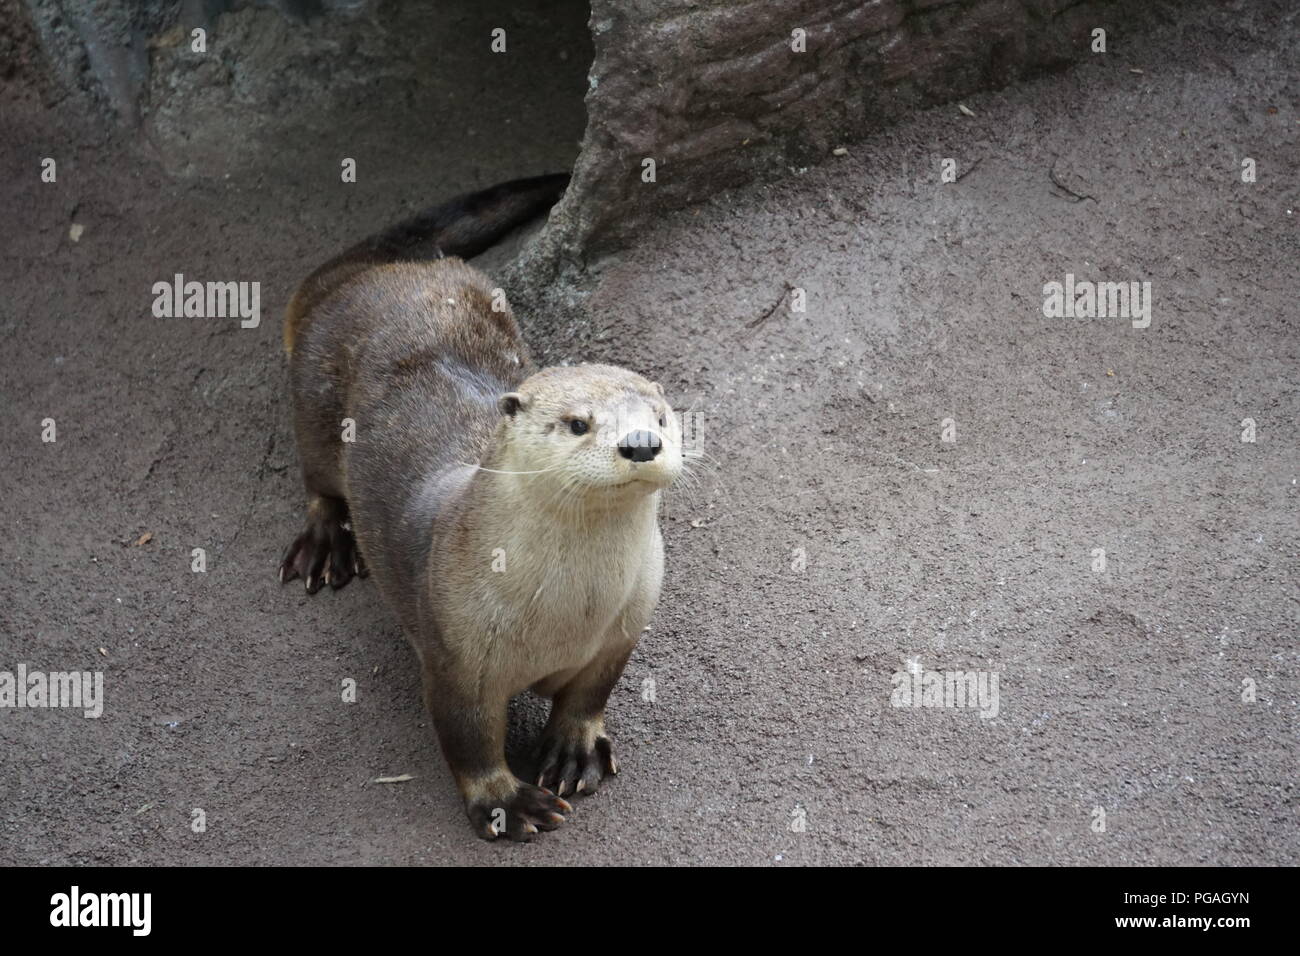 Otters in the Wildlife Encounters at Ober Gatlinburg, Gatlinburg Tennessee. Stock Photo